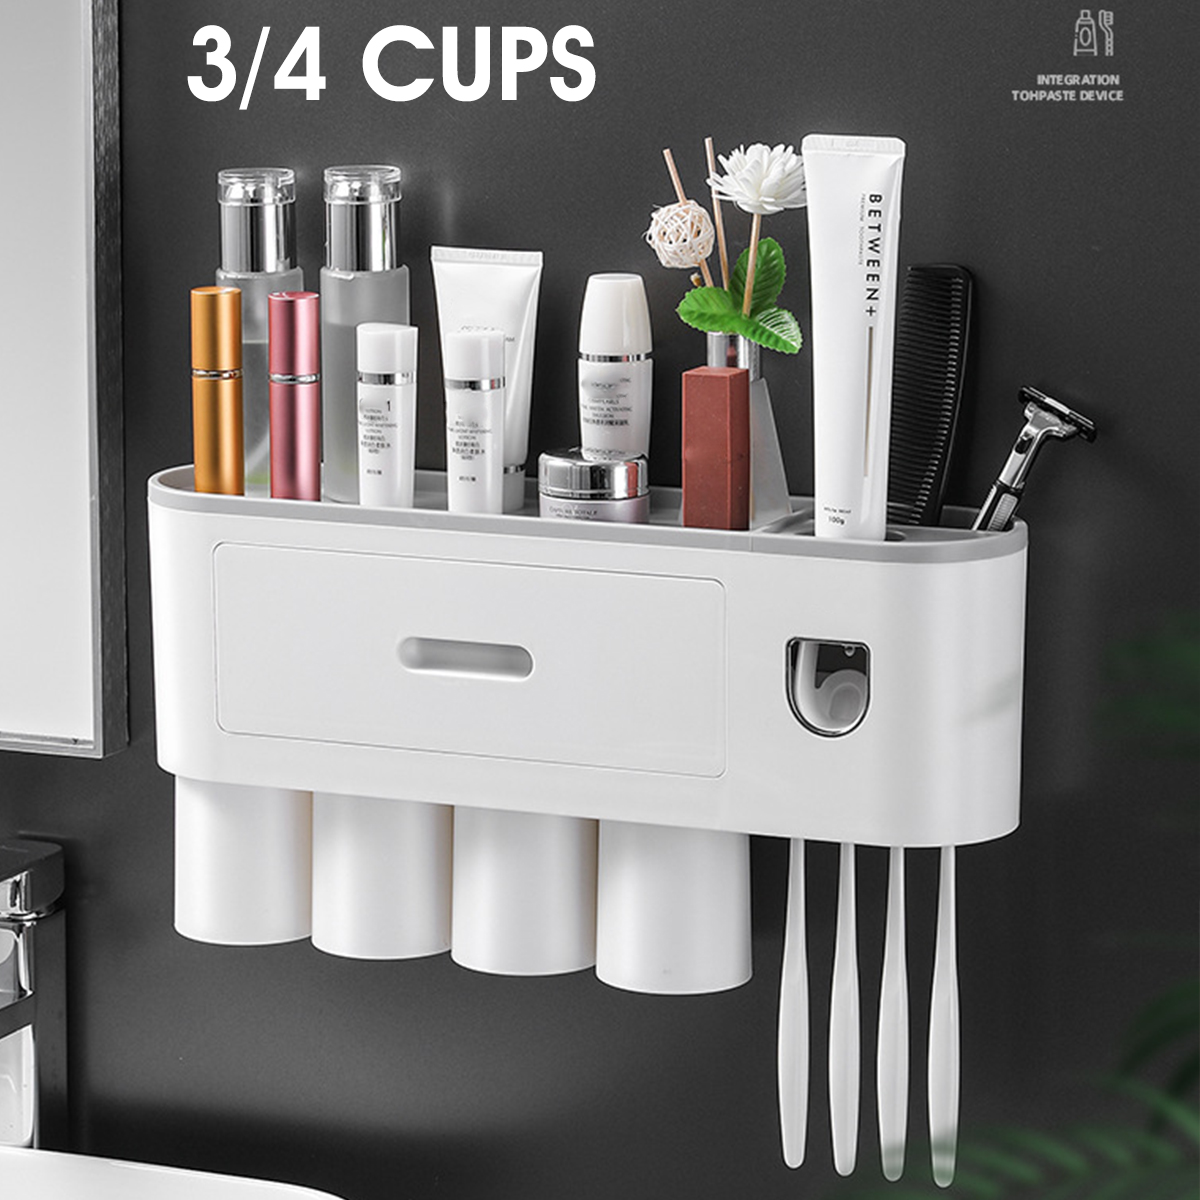 34-Cups-Magnetic-Toothbrush-Rack-Strong-Bearing-Automatic-Toothpaste-Squeezer-1769033-1